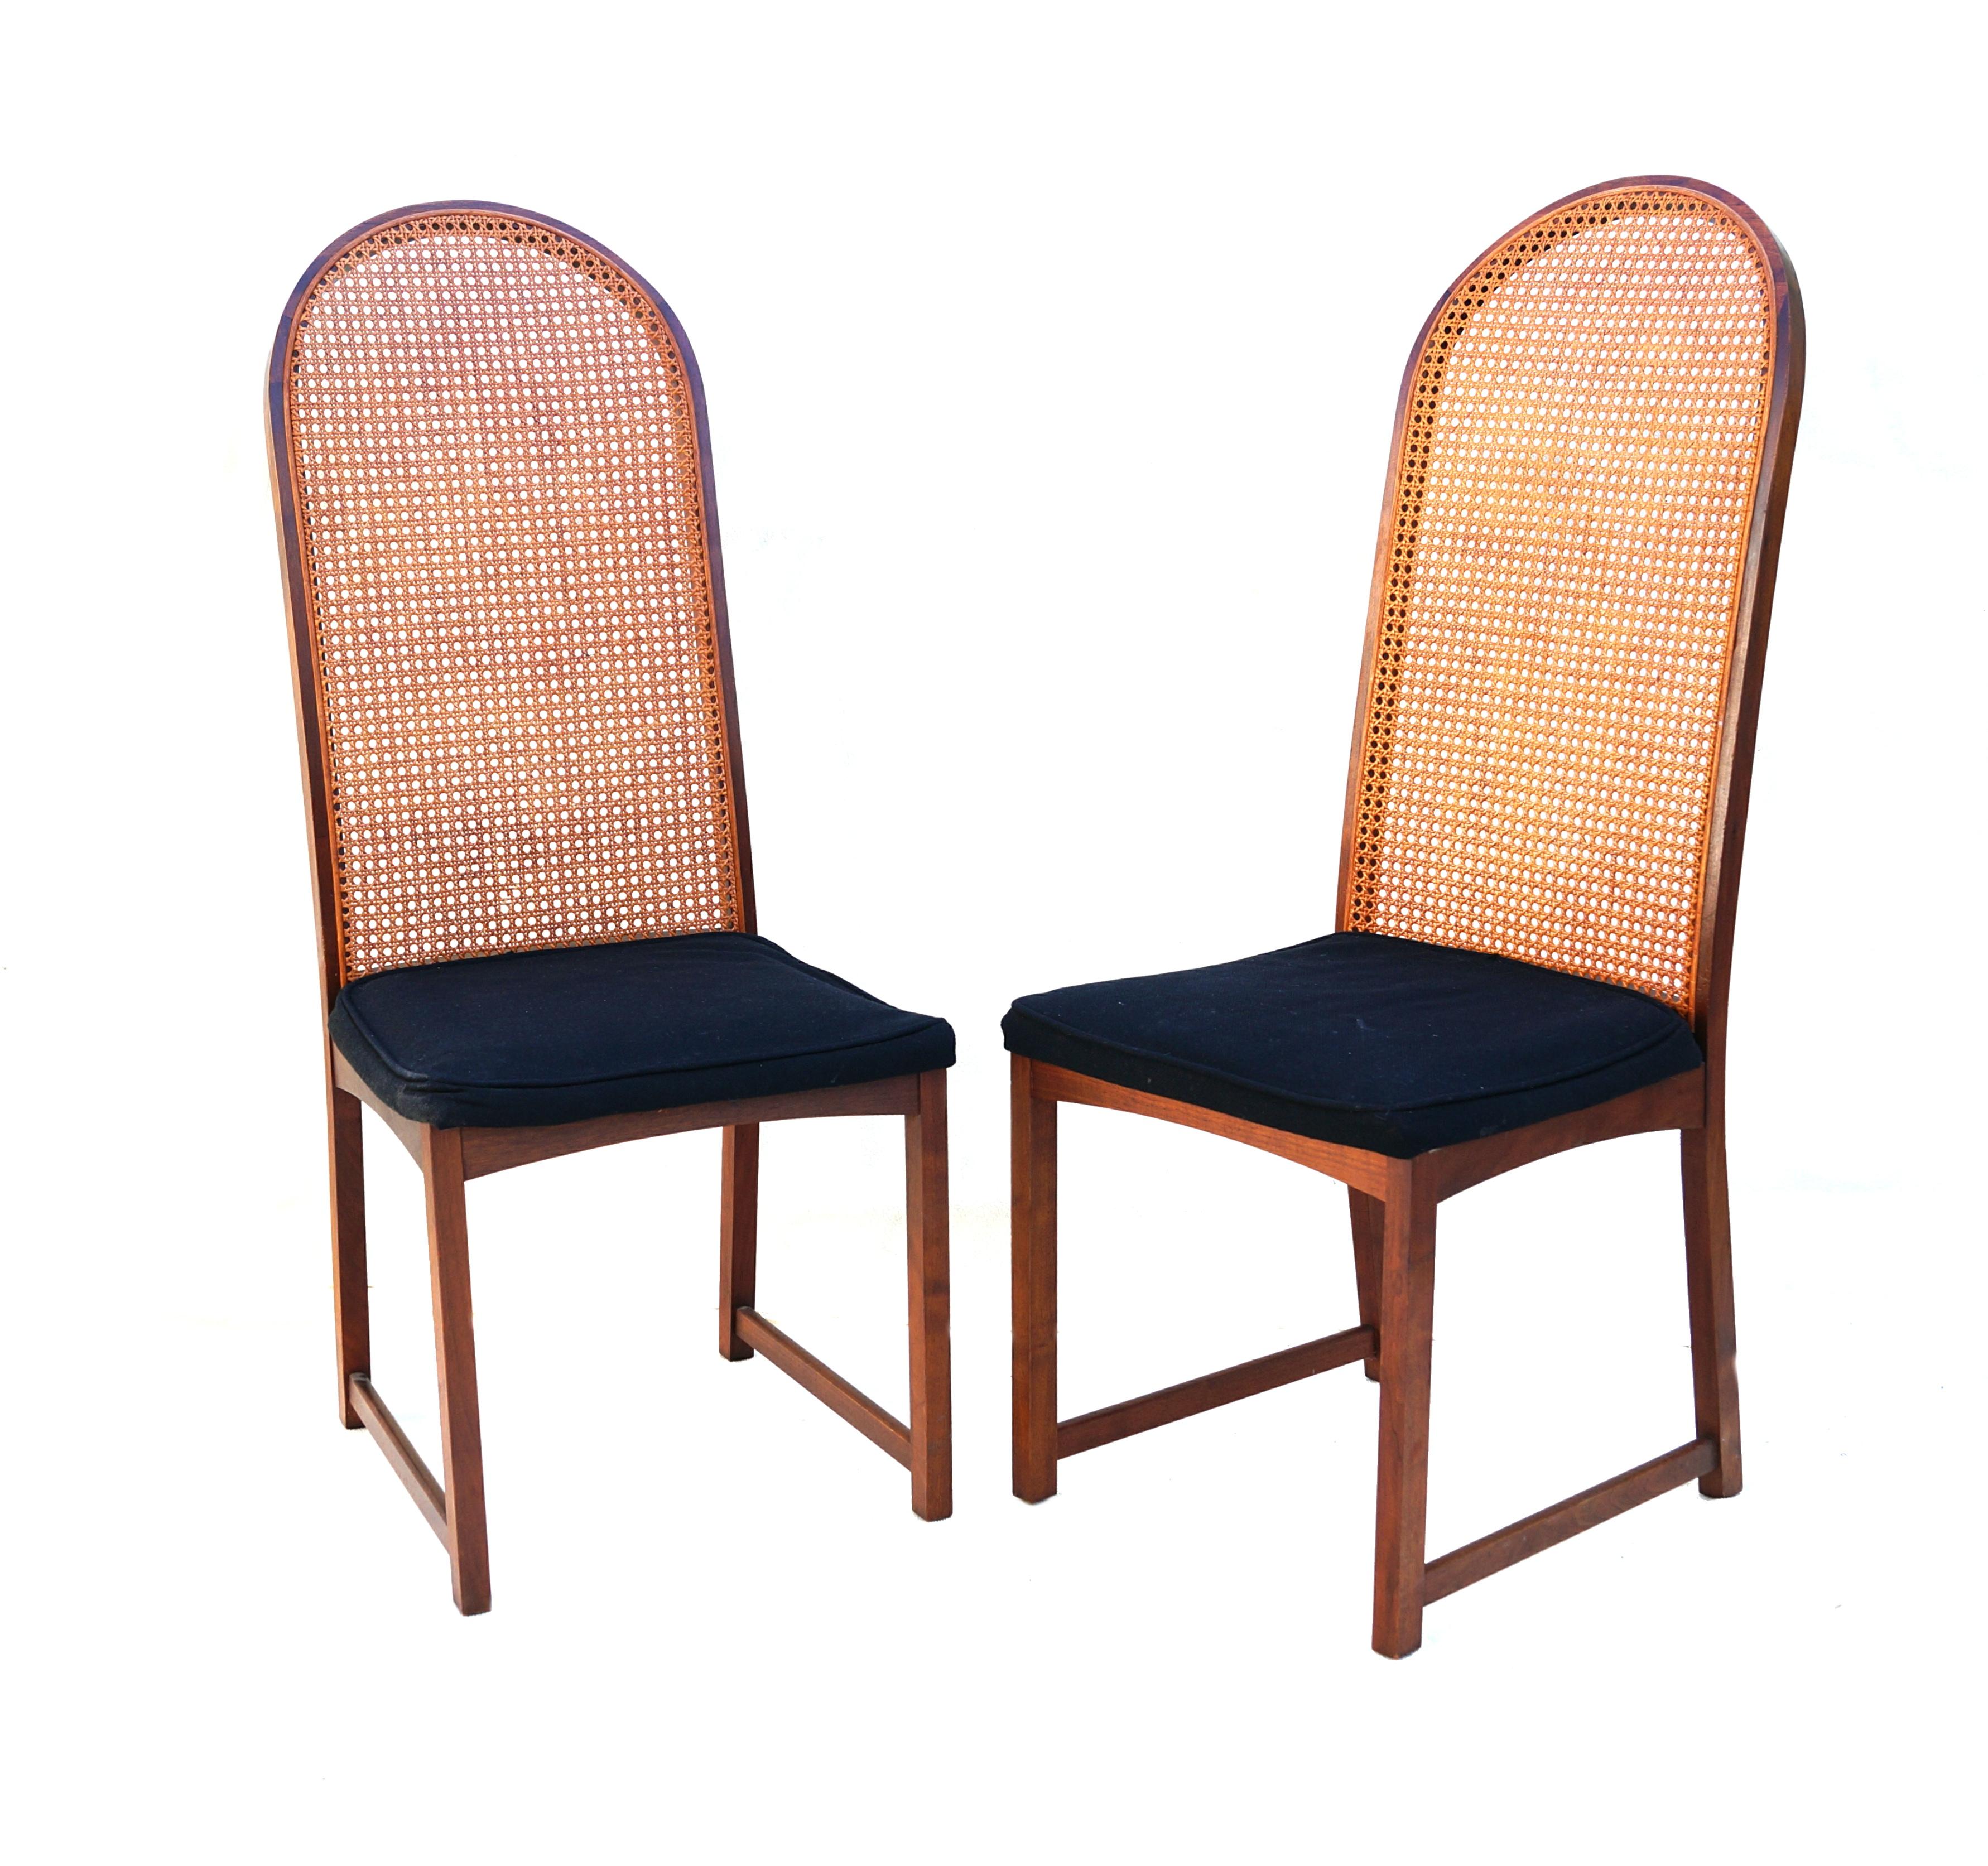 Set of 5 Milo Baughman curved cane back dining chairs.